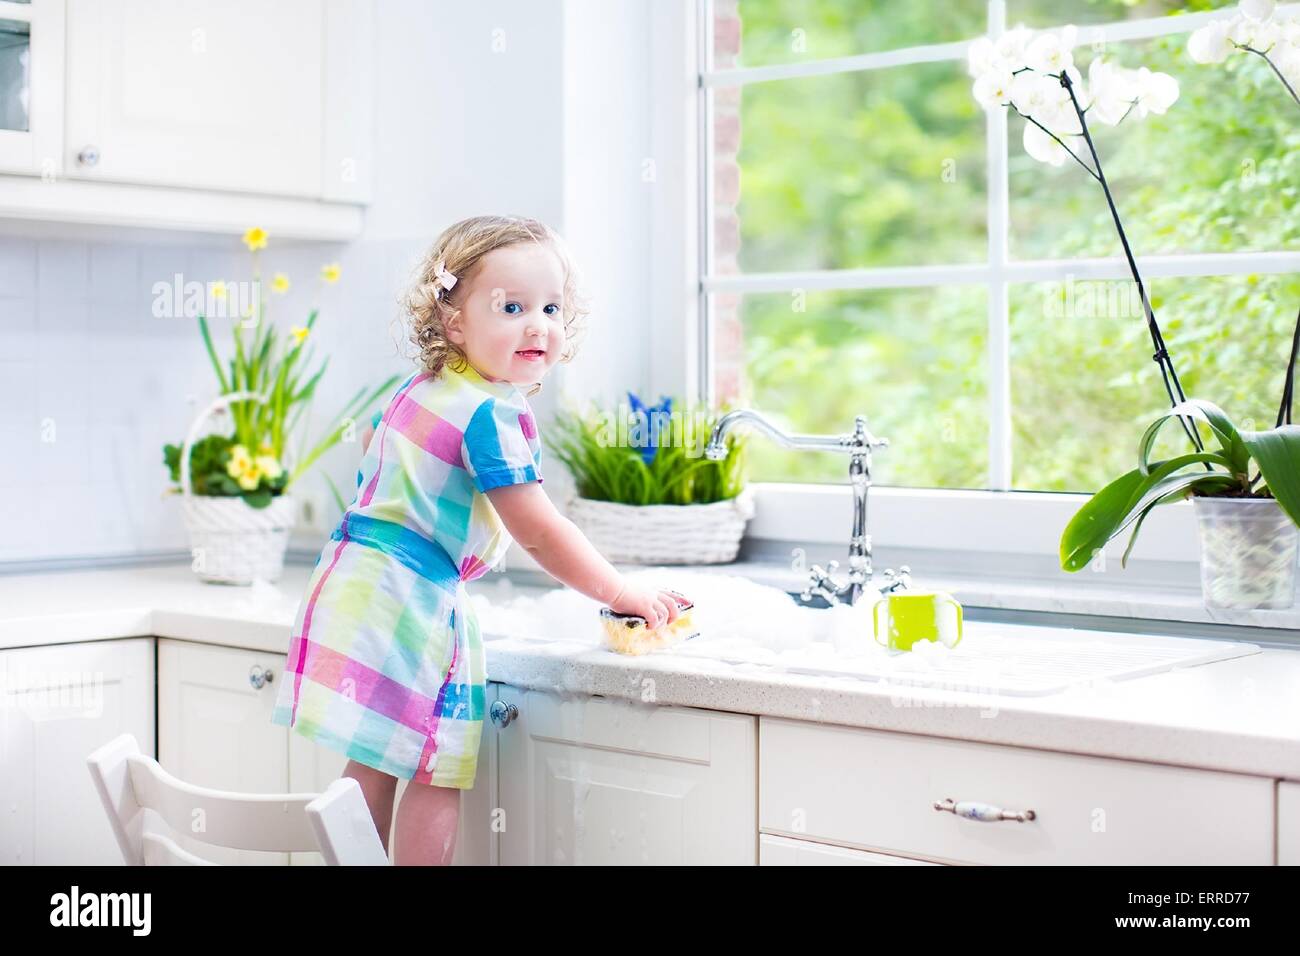 Cute curly toddler girl in a colorful dress washing dishes, cleaning with a sponge and playing with foam in the sink in kitchen Stock Photo